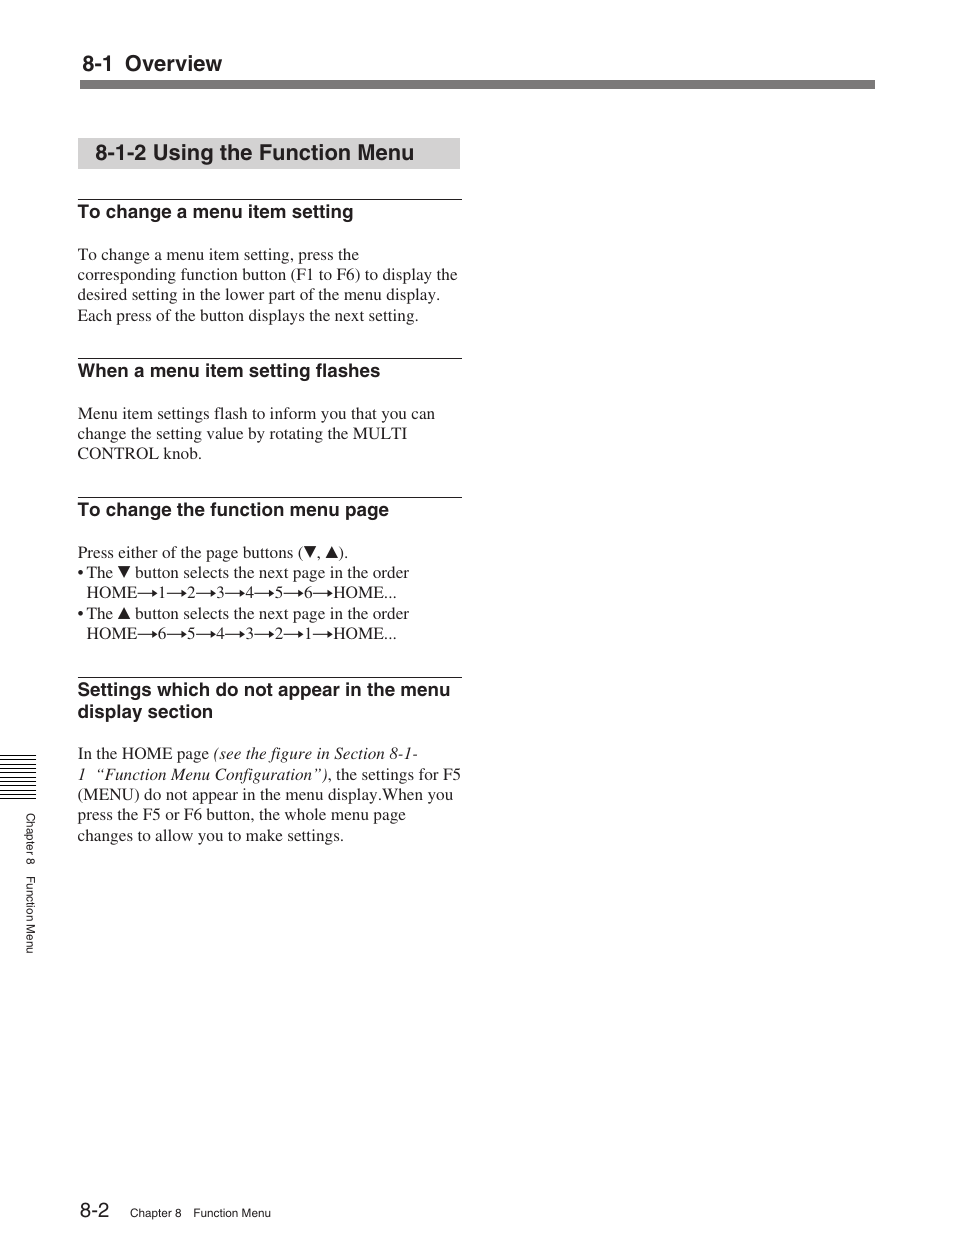 1-2 using the function menu, 1 overview | Sony HDW-M2100 User Manual | Page 66 / 115